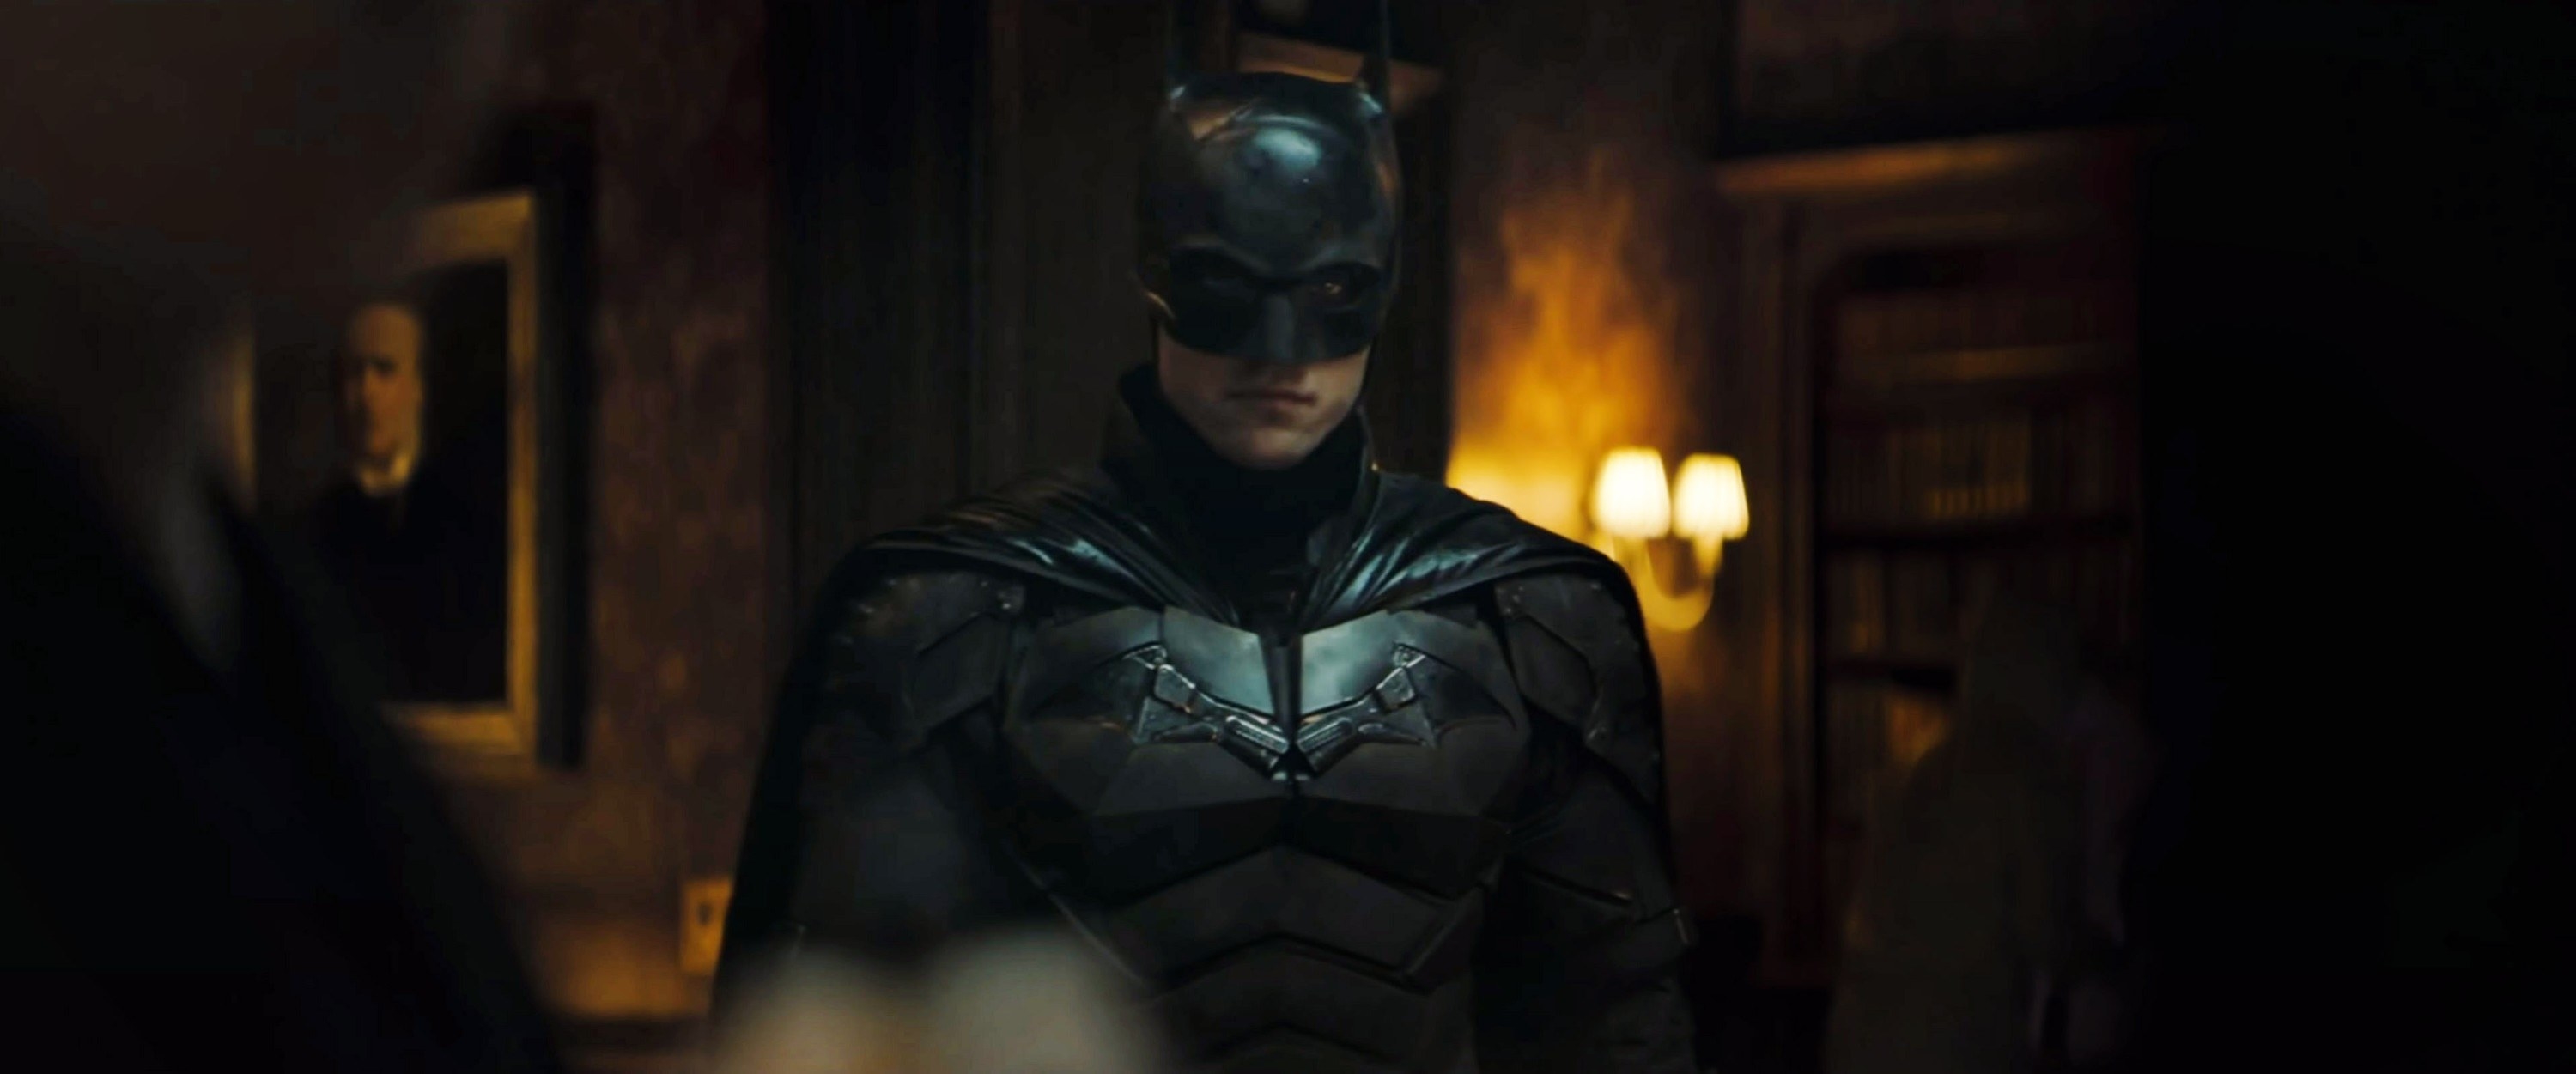 Rob in the Bat suit